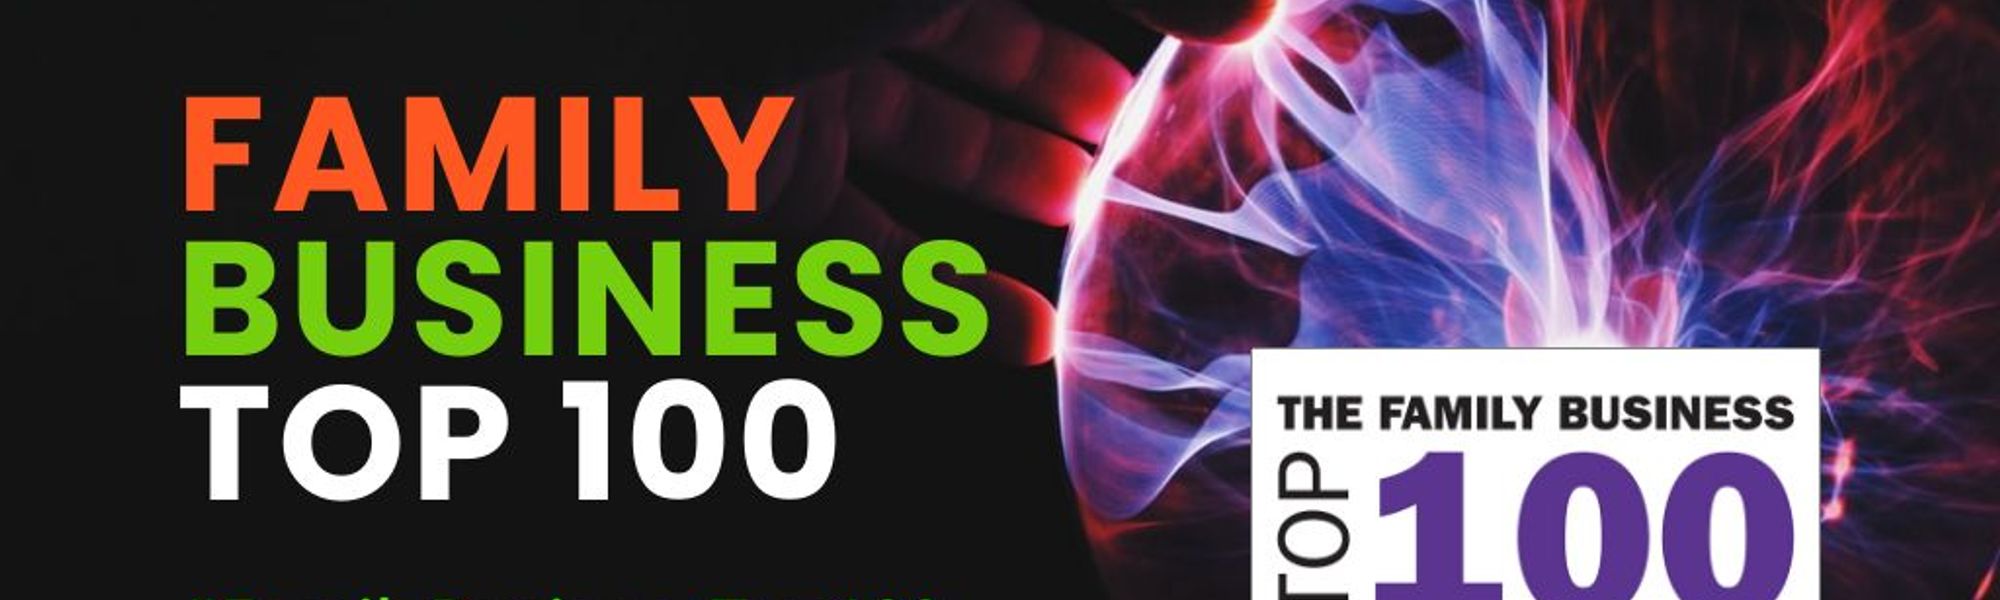 Family Business Top 100